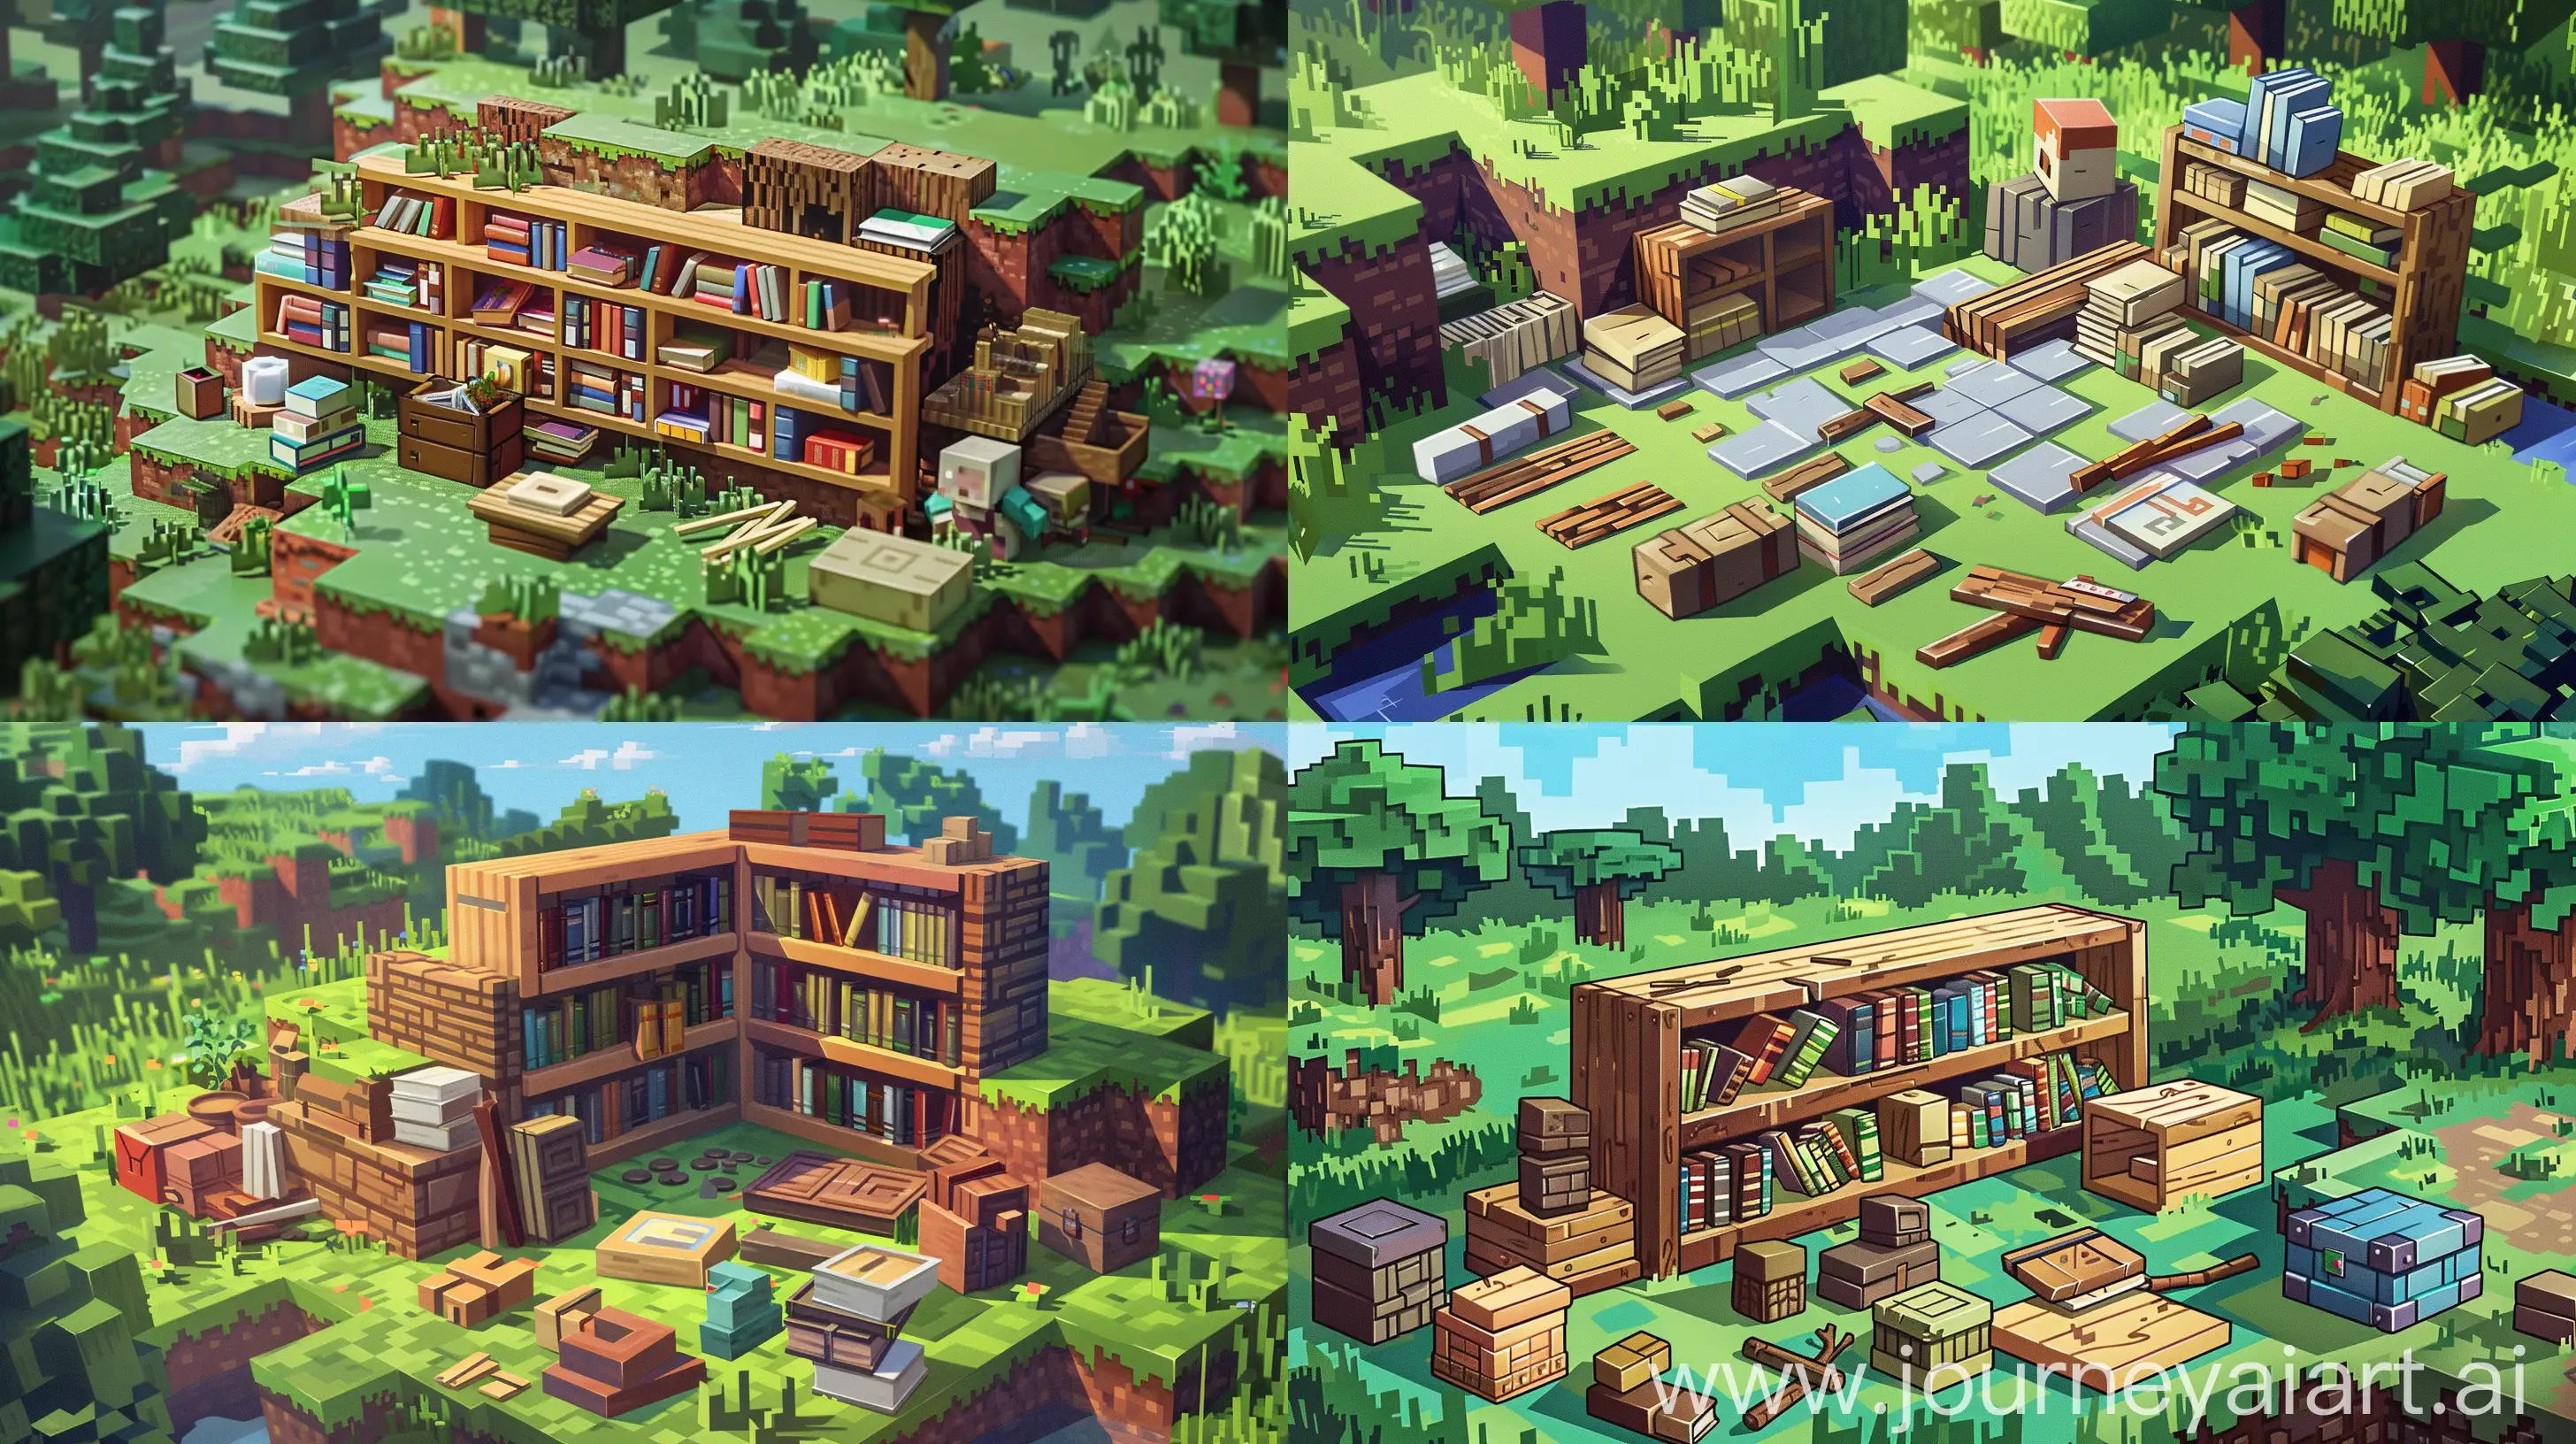 An intricate illustration portraying the step-by-step process of crafting a bookshelf in a Minecraft world. The scene depicts a character meticulously selecting a suitable location within the blocky landscape, considering factors like terrain and aesthetics. They gather various materials, including wood planks, sticks, and books, each item meticulously detailed to capture its Minecraft essence. With careful precision, the character begins constructing the foundation of the bookshelf, placing blocks in a strategic arrangement to ensure stability and functionality. The environment exudes the signature pixelated charm of the Minecraft universe, with lush grass, towering trees, and rolling hills in the background, hinting at the expansive possibilities of the virtual realm. The illustration seamlessly combines elements of creativity, craftsmanship, and exploration intrinsic to the Minecraft experience, inviting viewers to embark on their own crafting adventures. --ar 16:9 